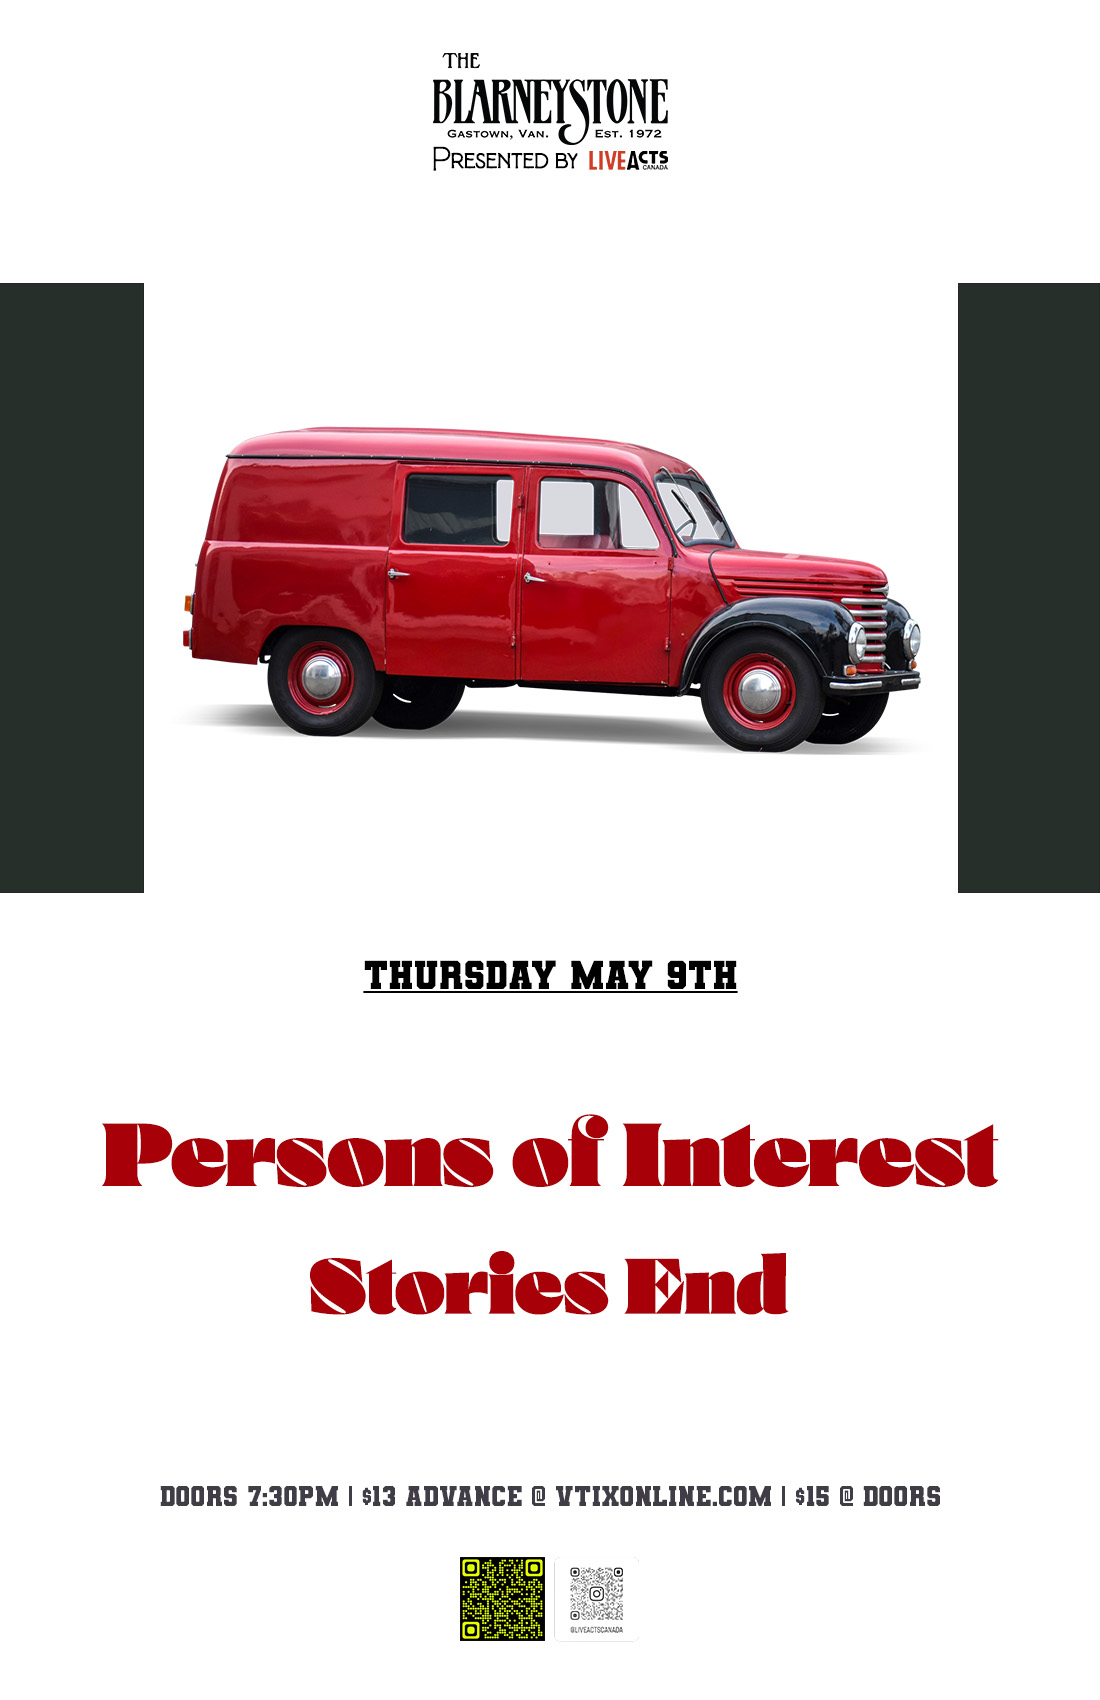 Persons of Interest w/ Stories End